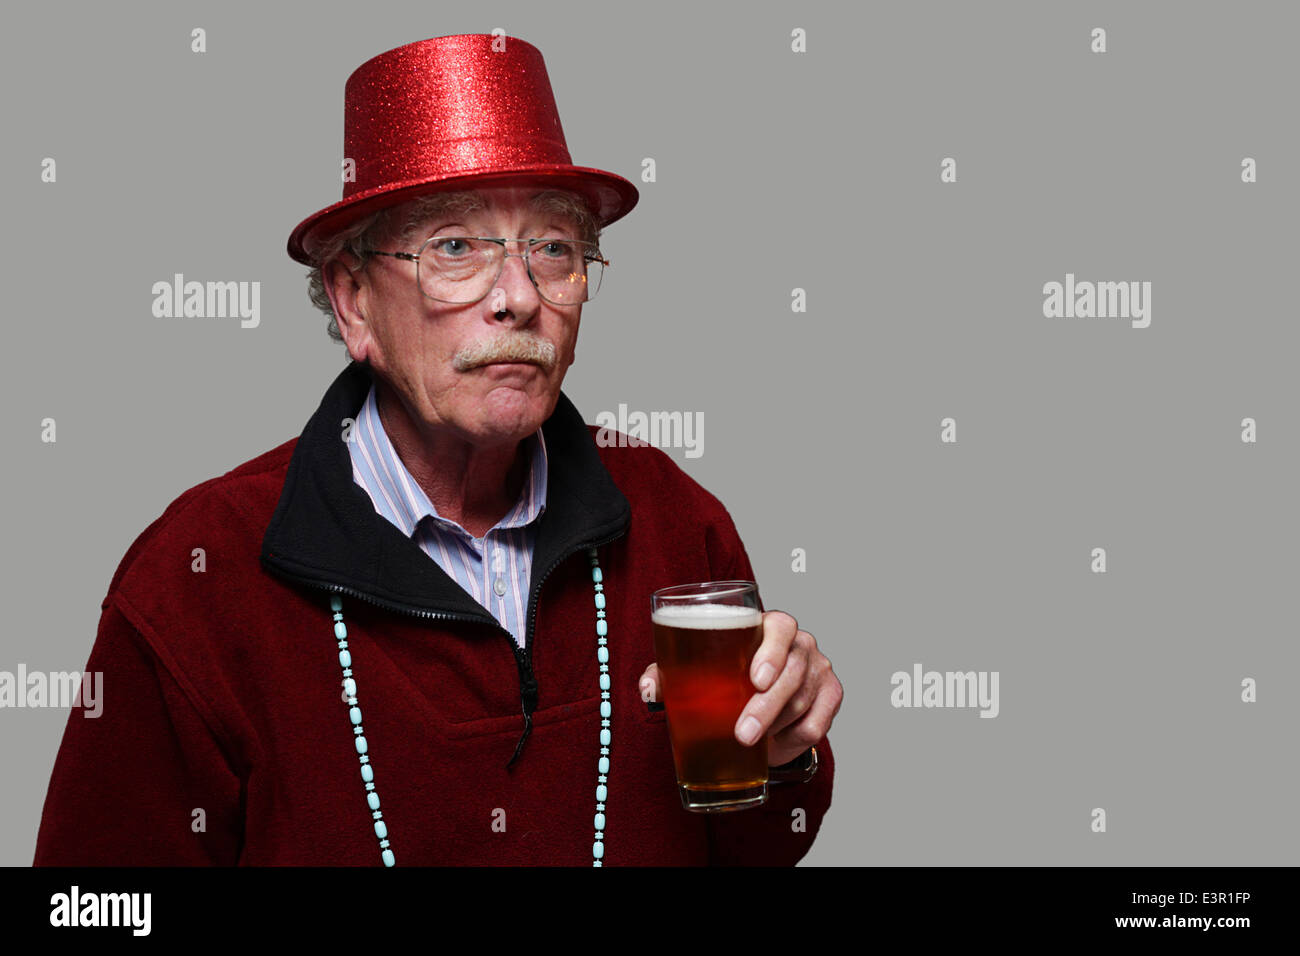 An elderly man in a red party hat holding a glass of beer Stock Photo